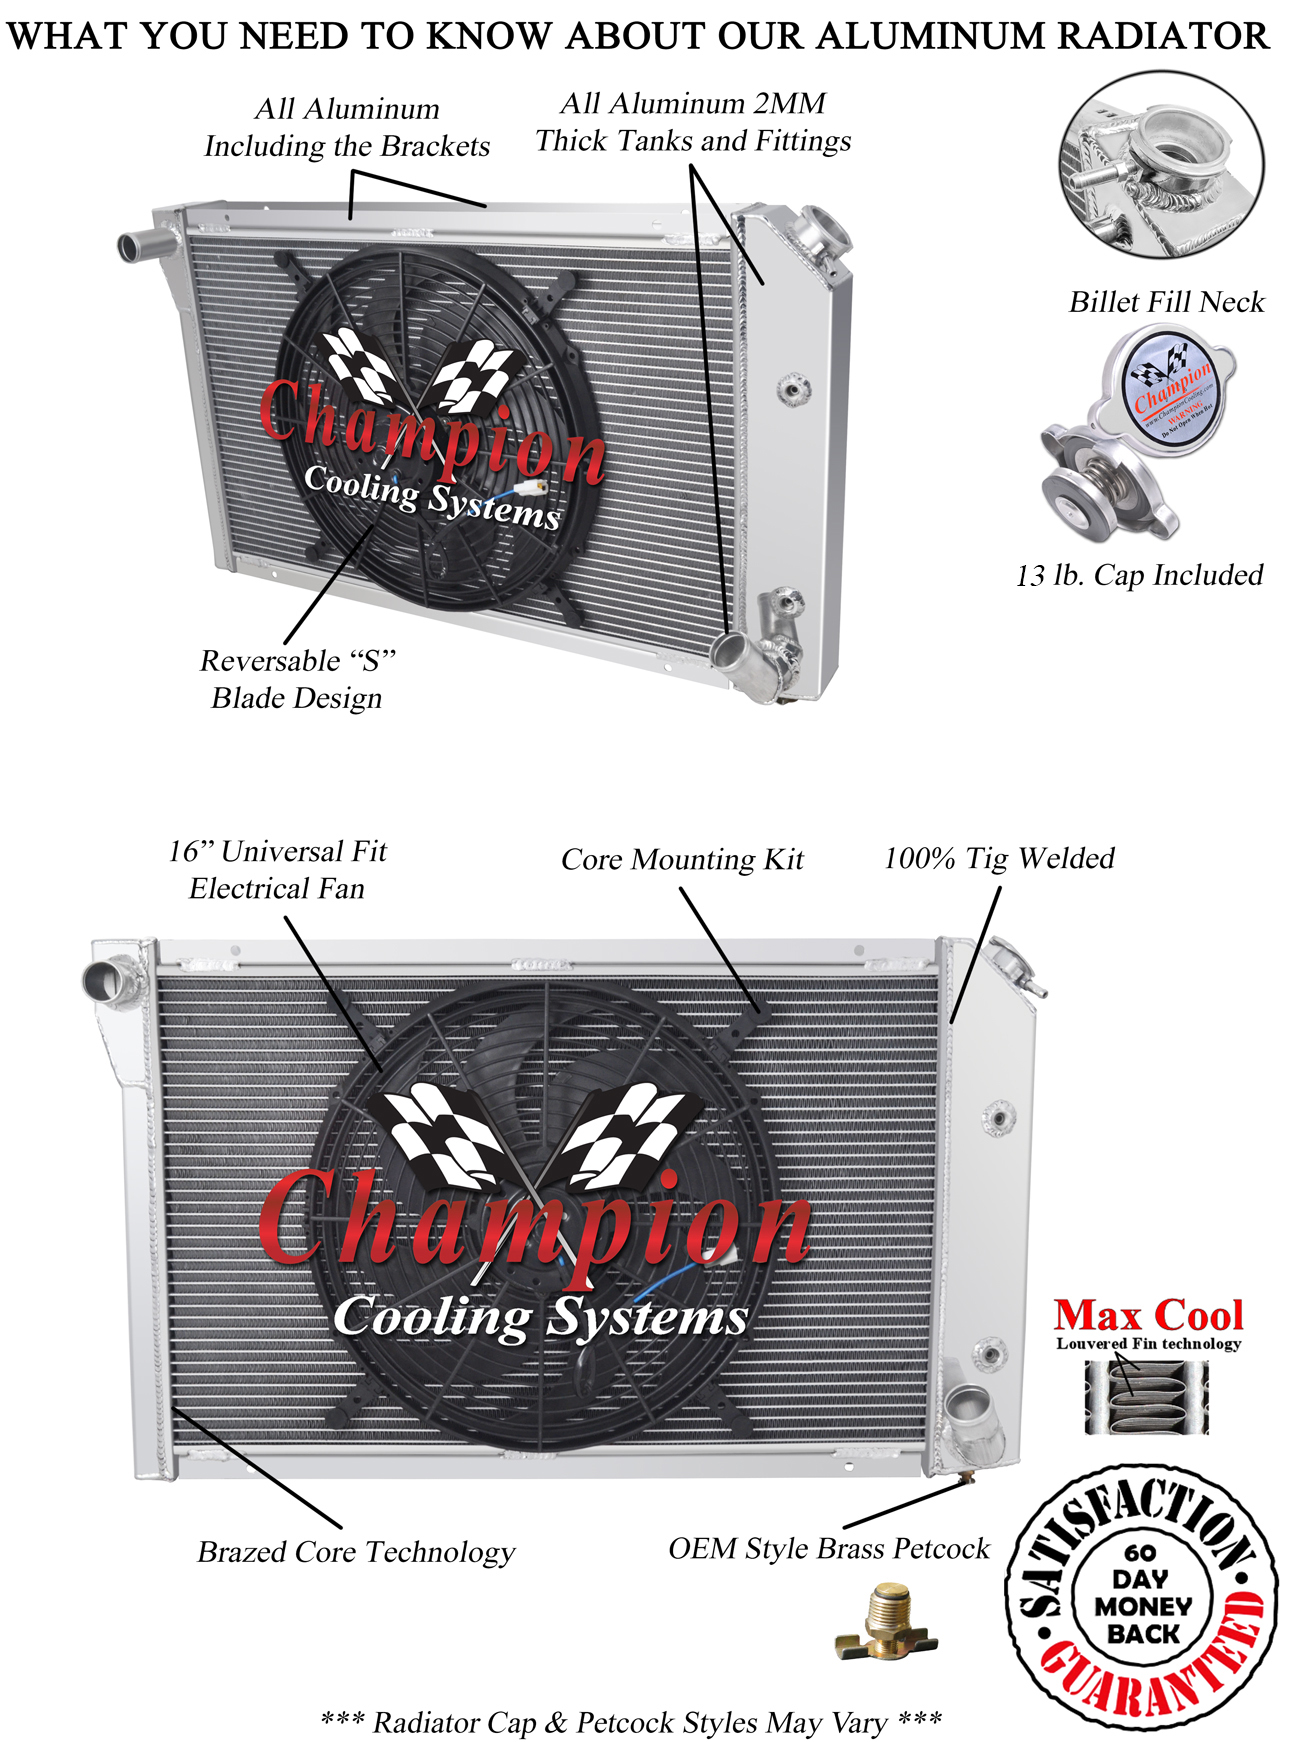 https://www.championcooling.com/photos/Photos%20White/With%20Fans/Combos/718/16/718_1f_d_w.jpg